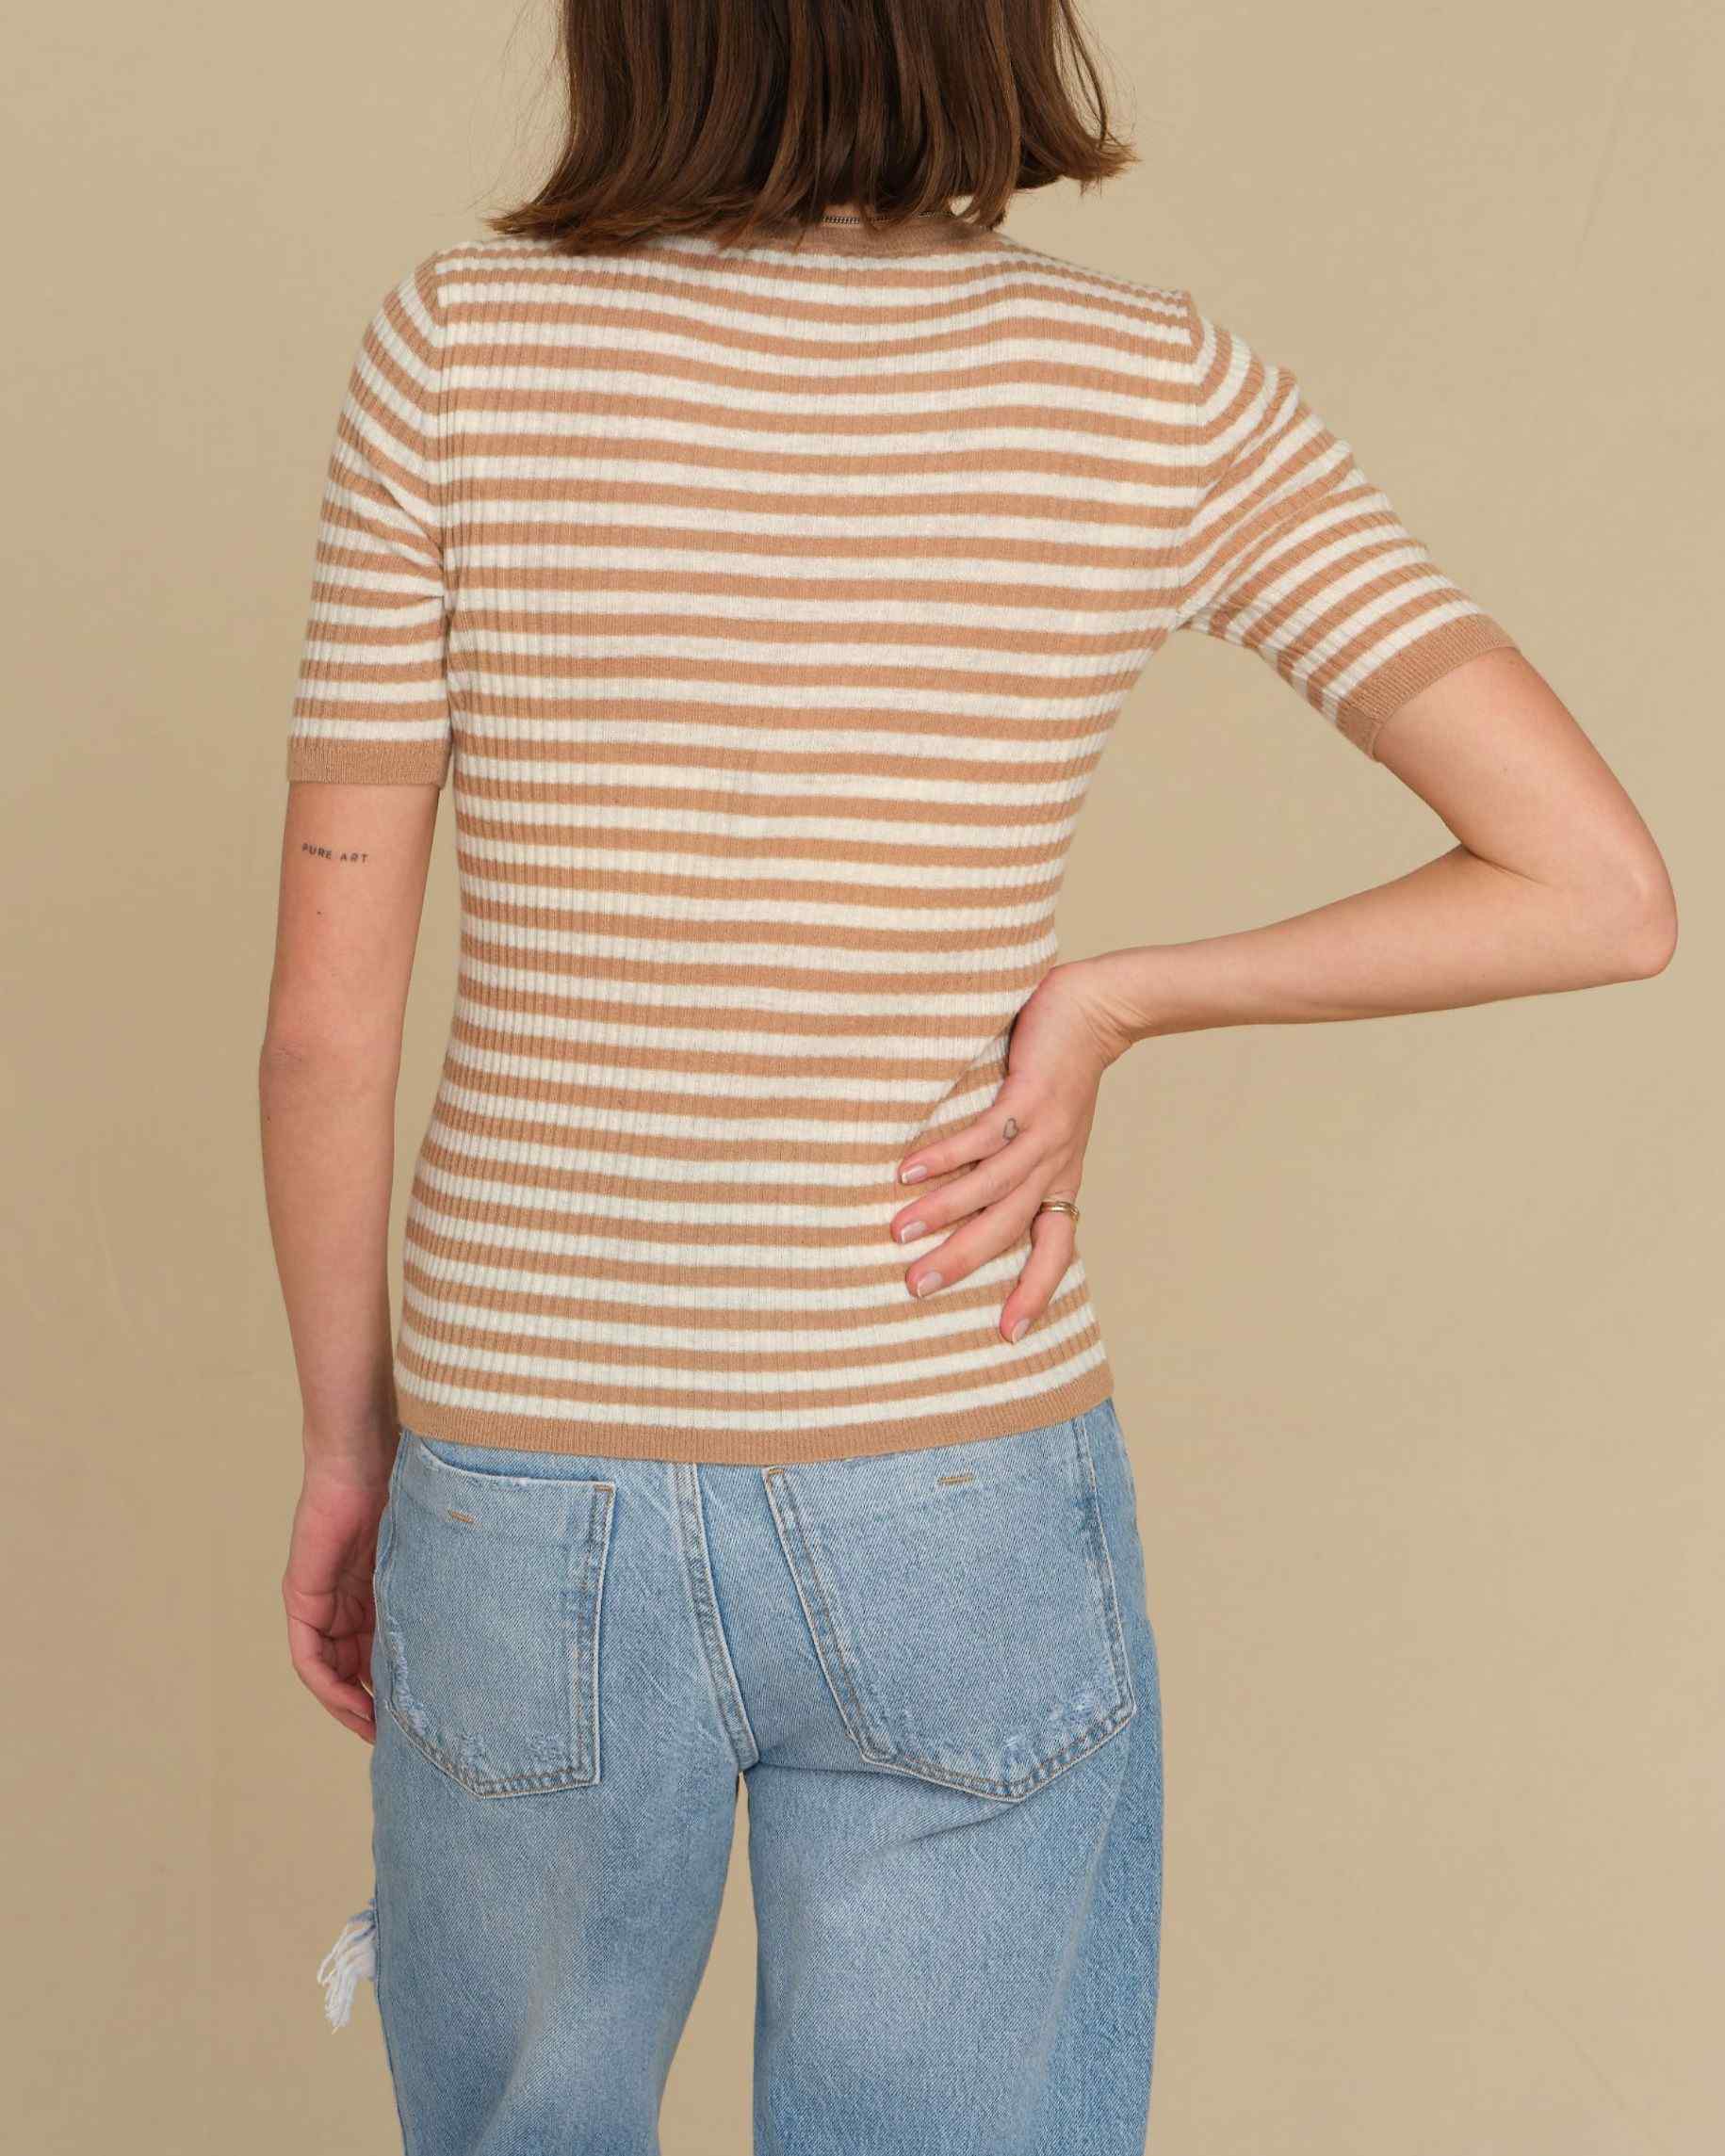 Shop Women's Cashmere Short Sleeve Striped Sweater | The Cashmere Project | JANE + MERCER